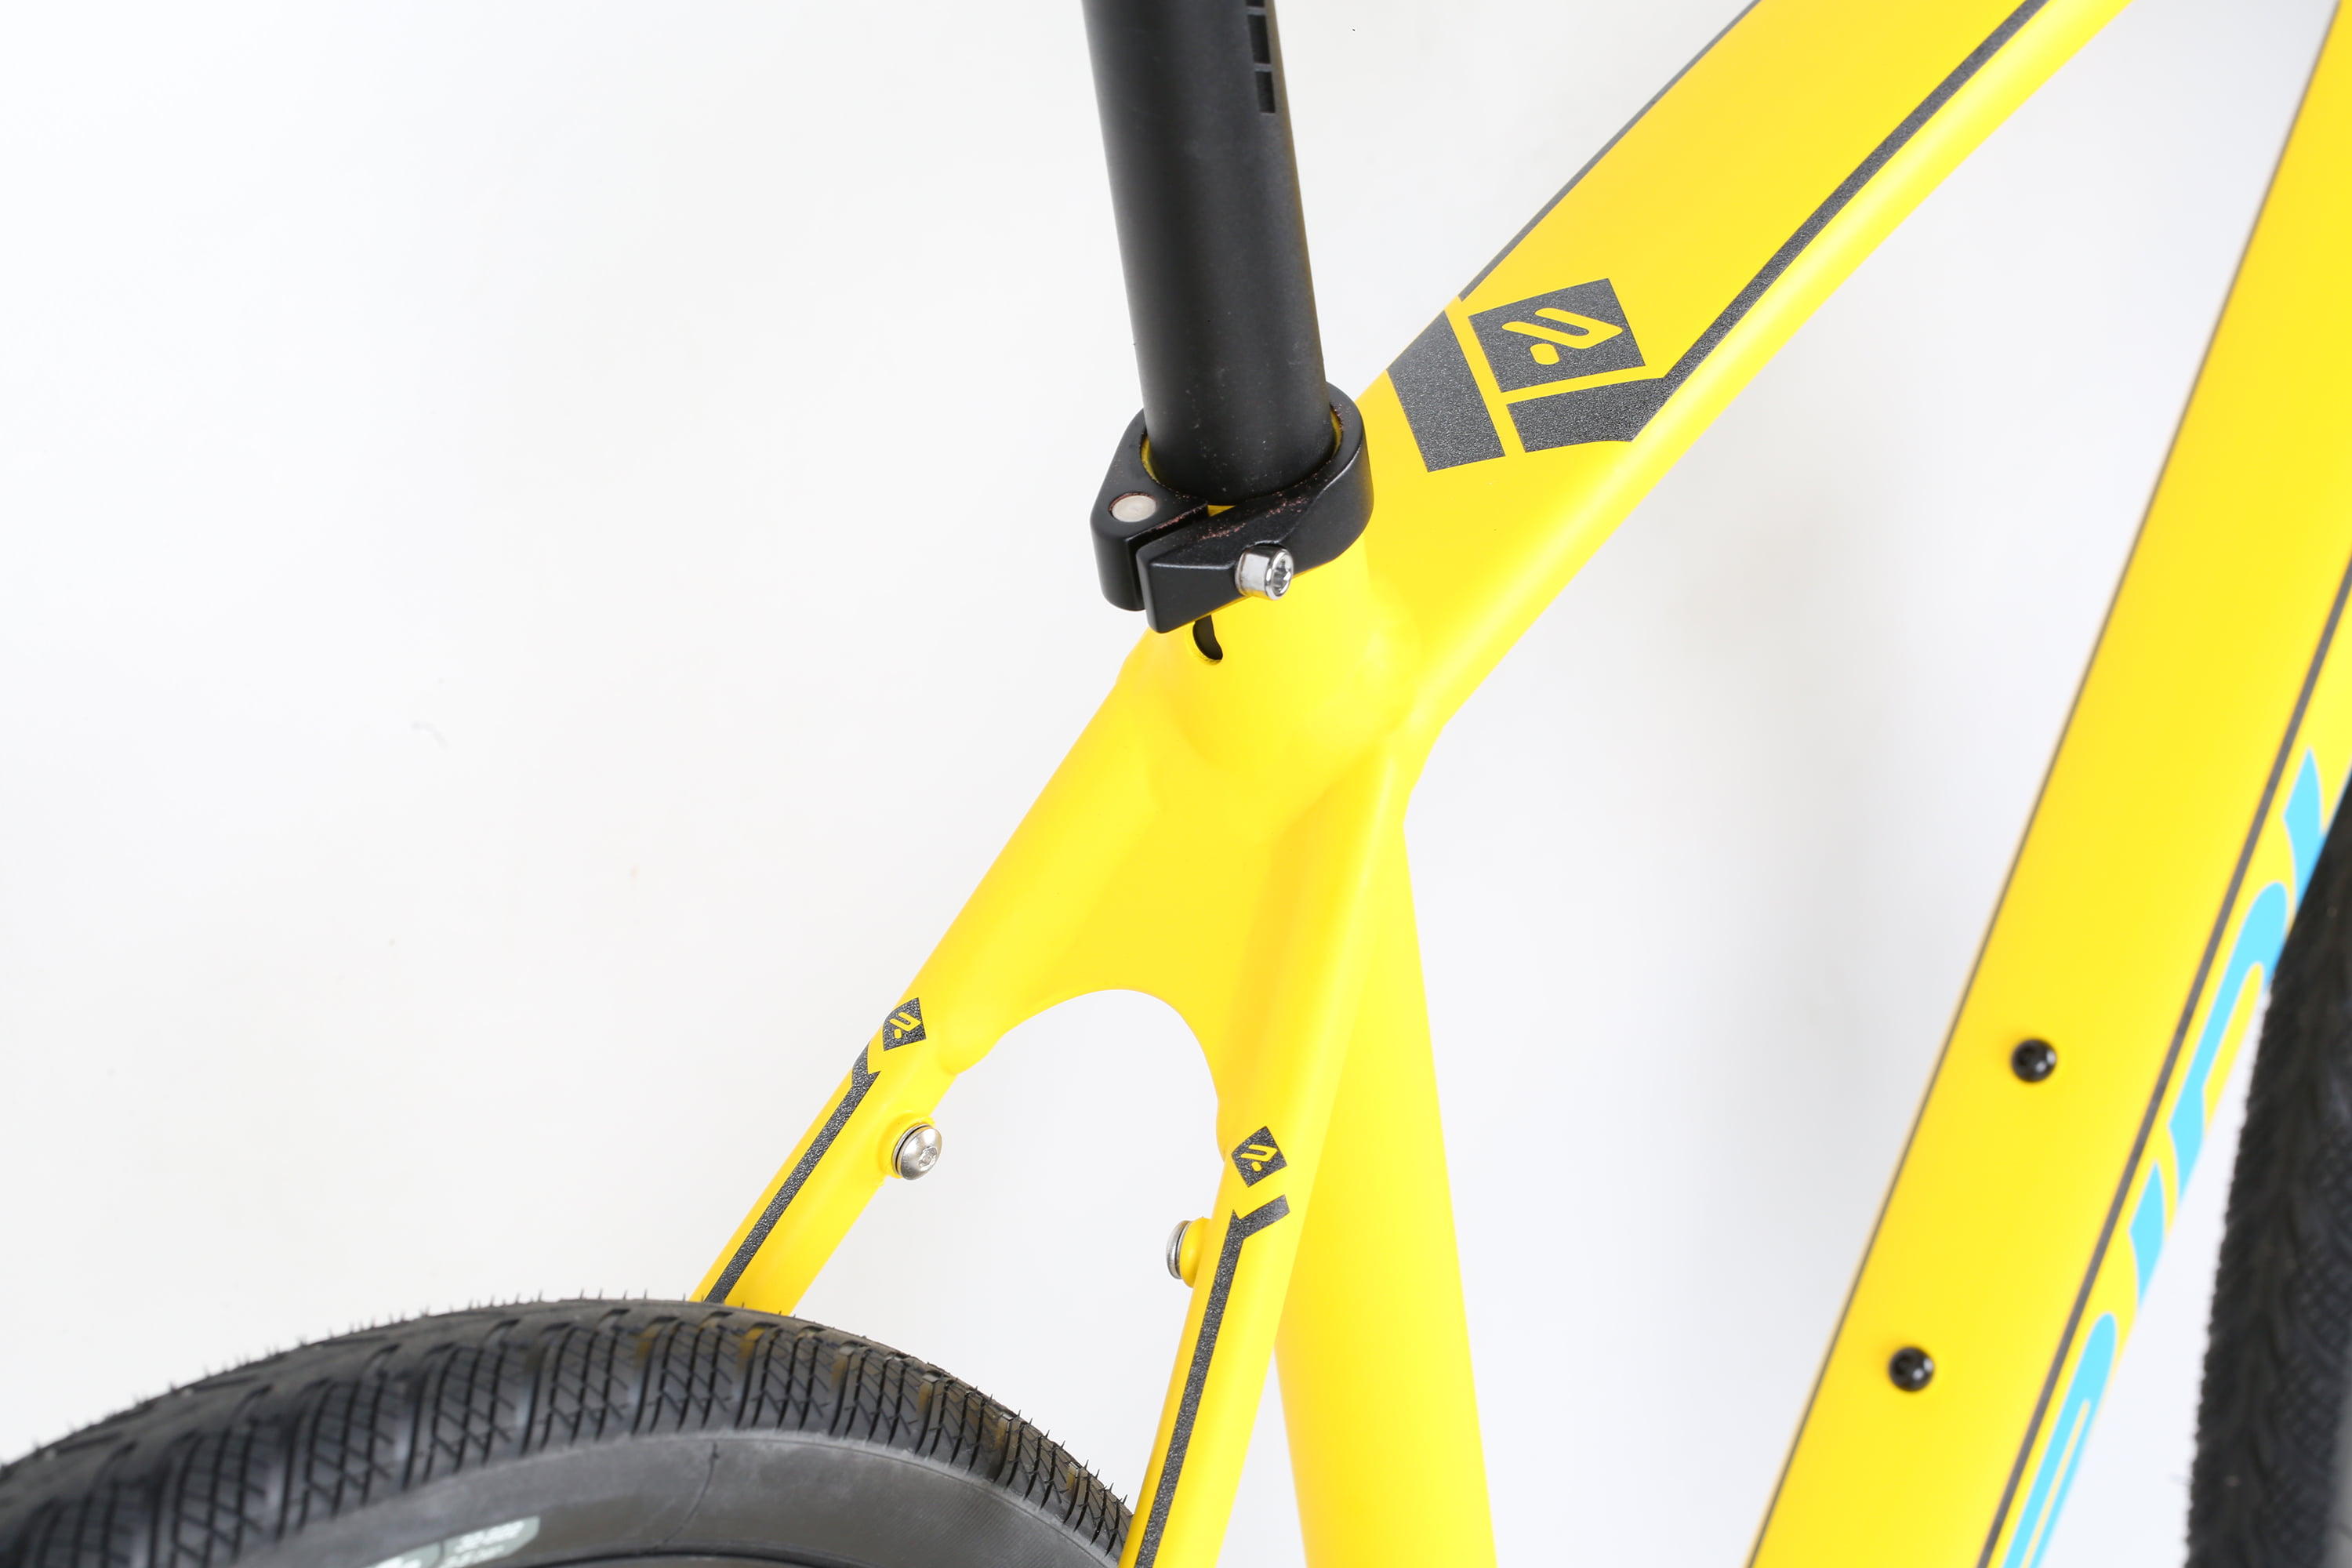 Ridley X-Trail Gravel Bicycle - Alloy with Shimano 105 Groupset, Disc Brakes Size XS, Yellow Walmart.com